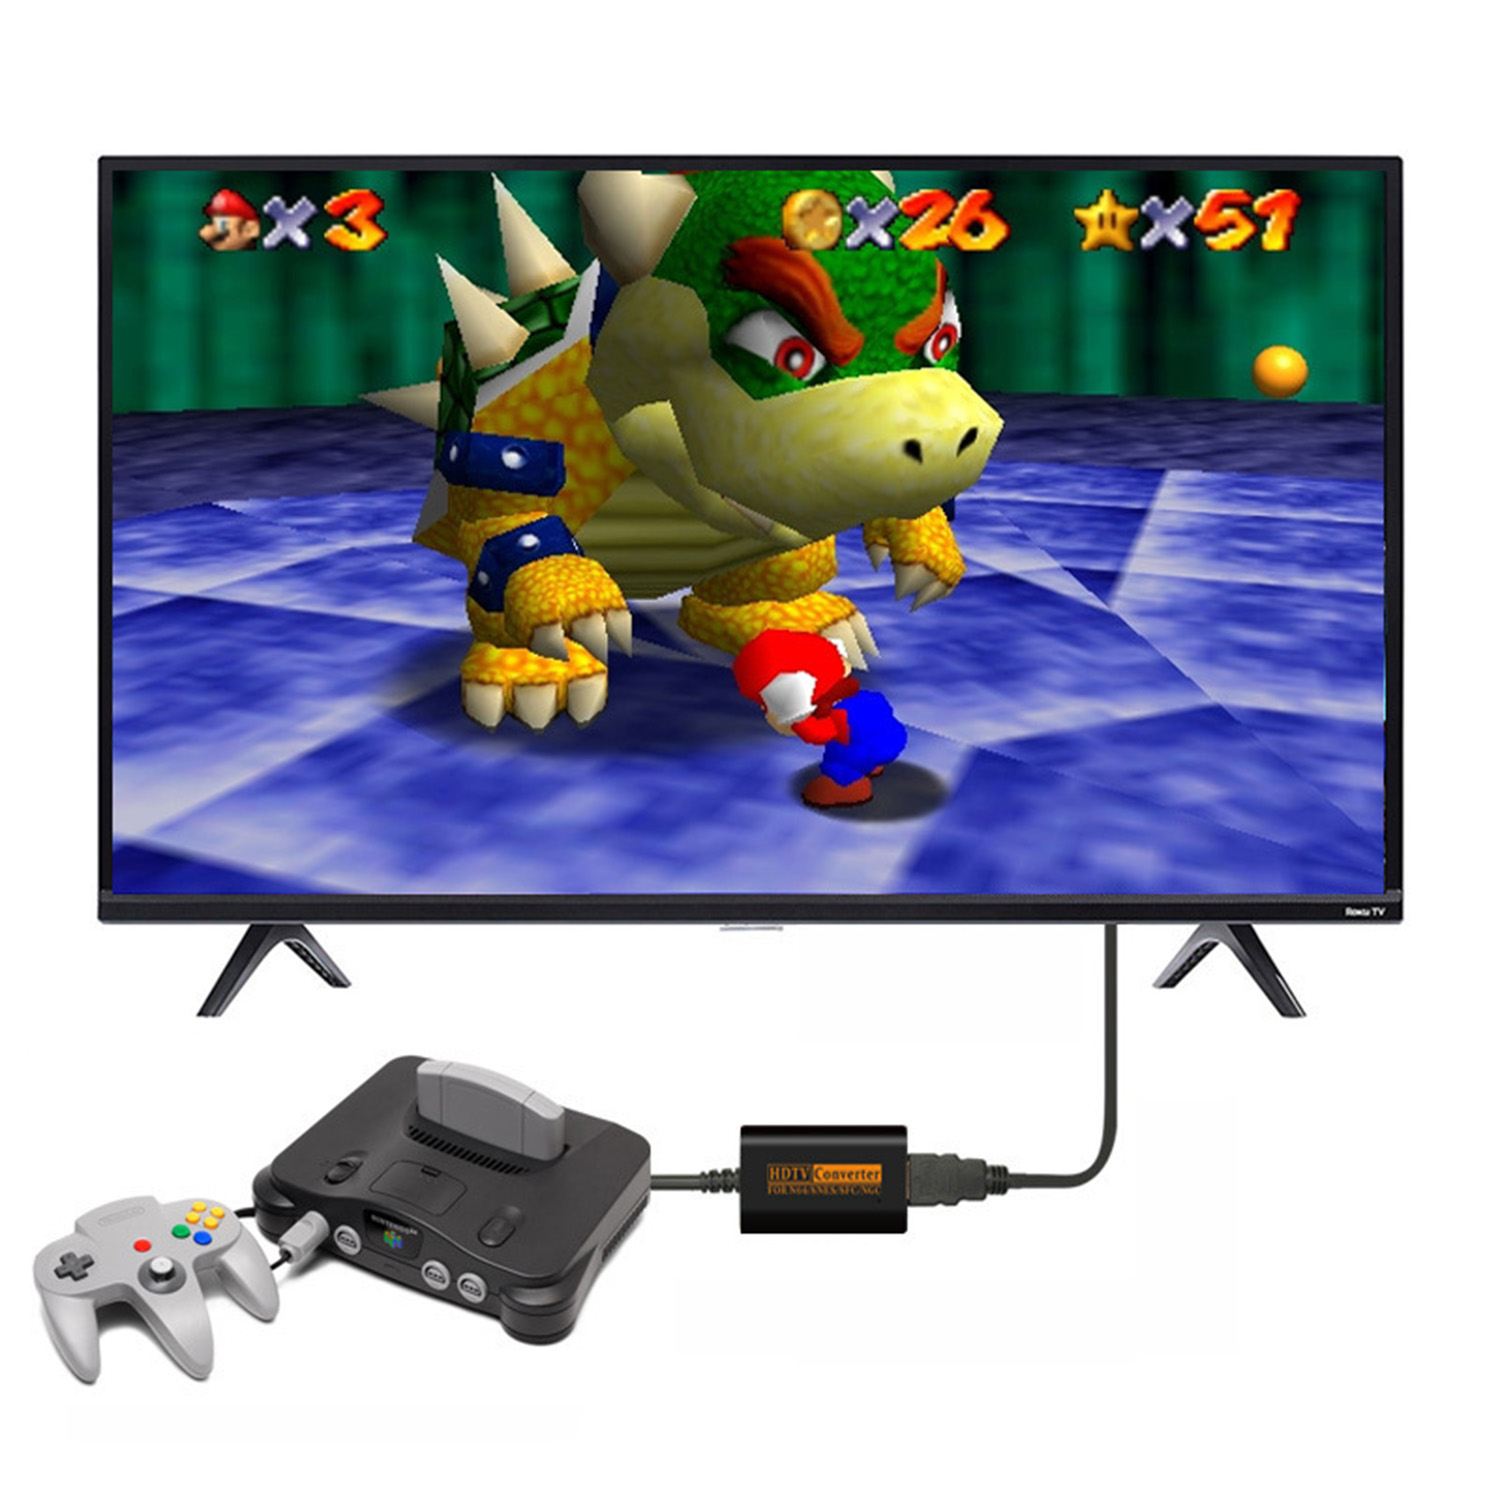 Bitfunx-HDMI-compatible-Converter-Adapter-for-NGCSNESN64SFC-for-Nintendo-64-for-GameCube-Plug-And-Pl-1887824-11